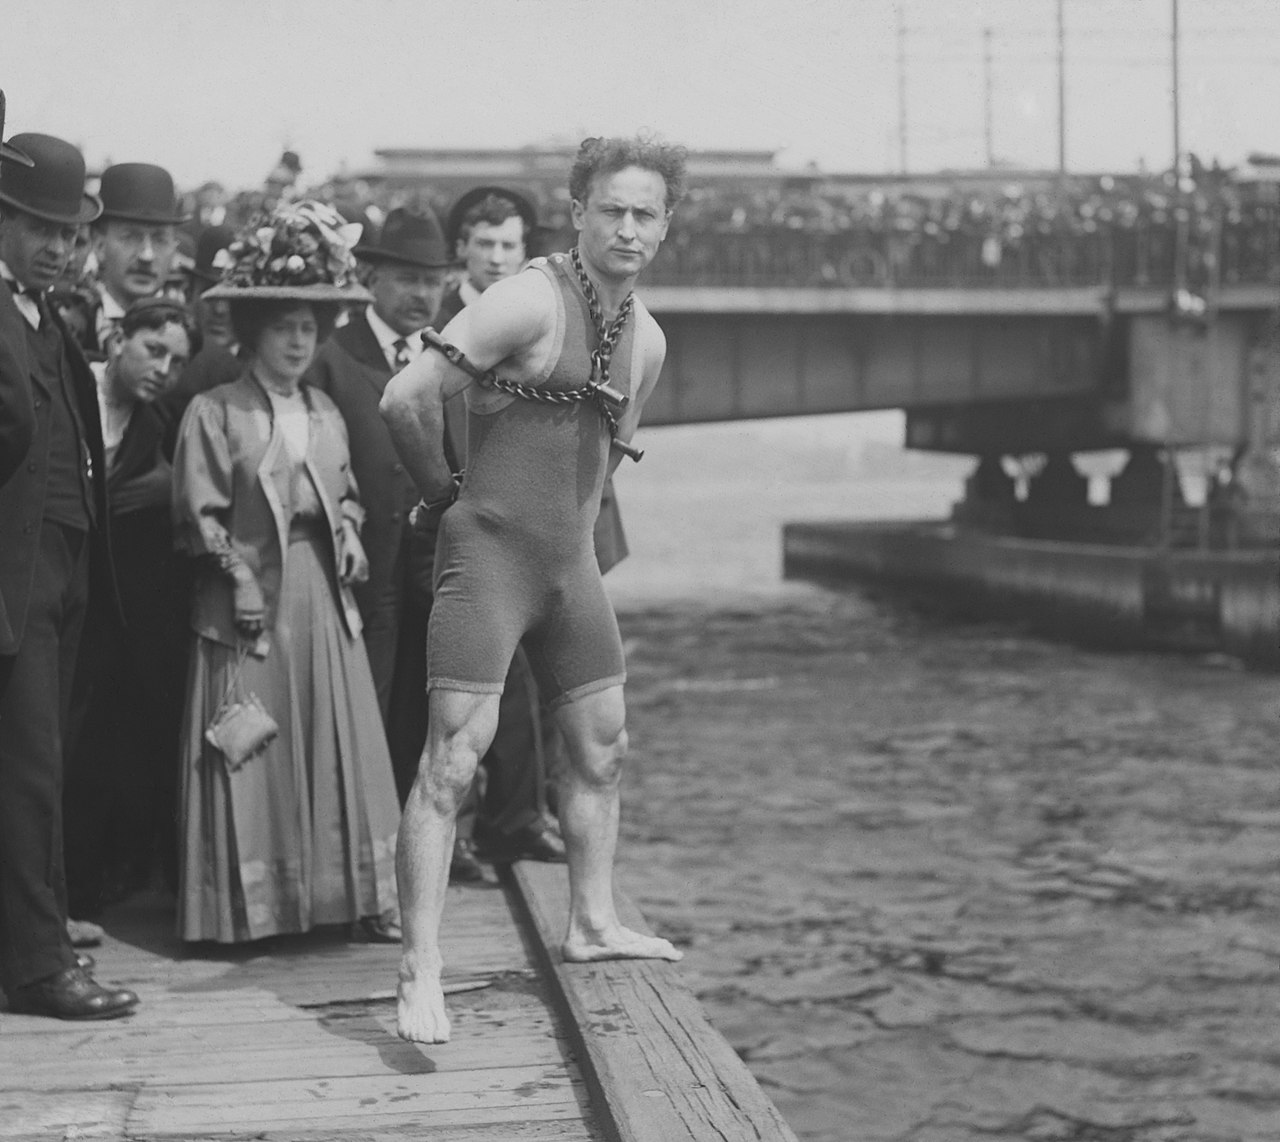 Houdini stands chained before a crowd of spectators in Boston